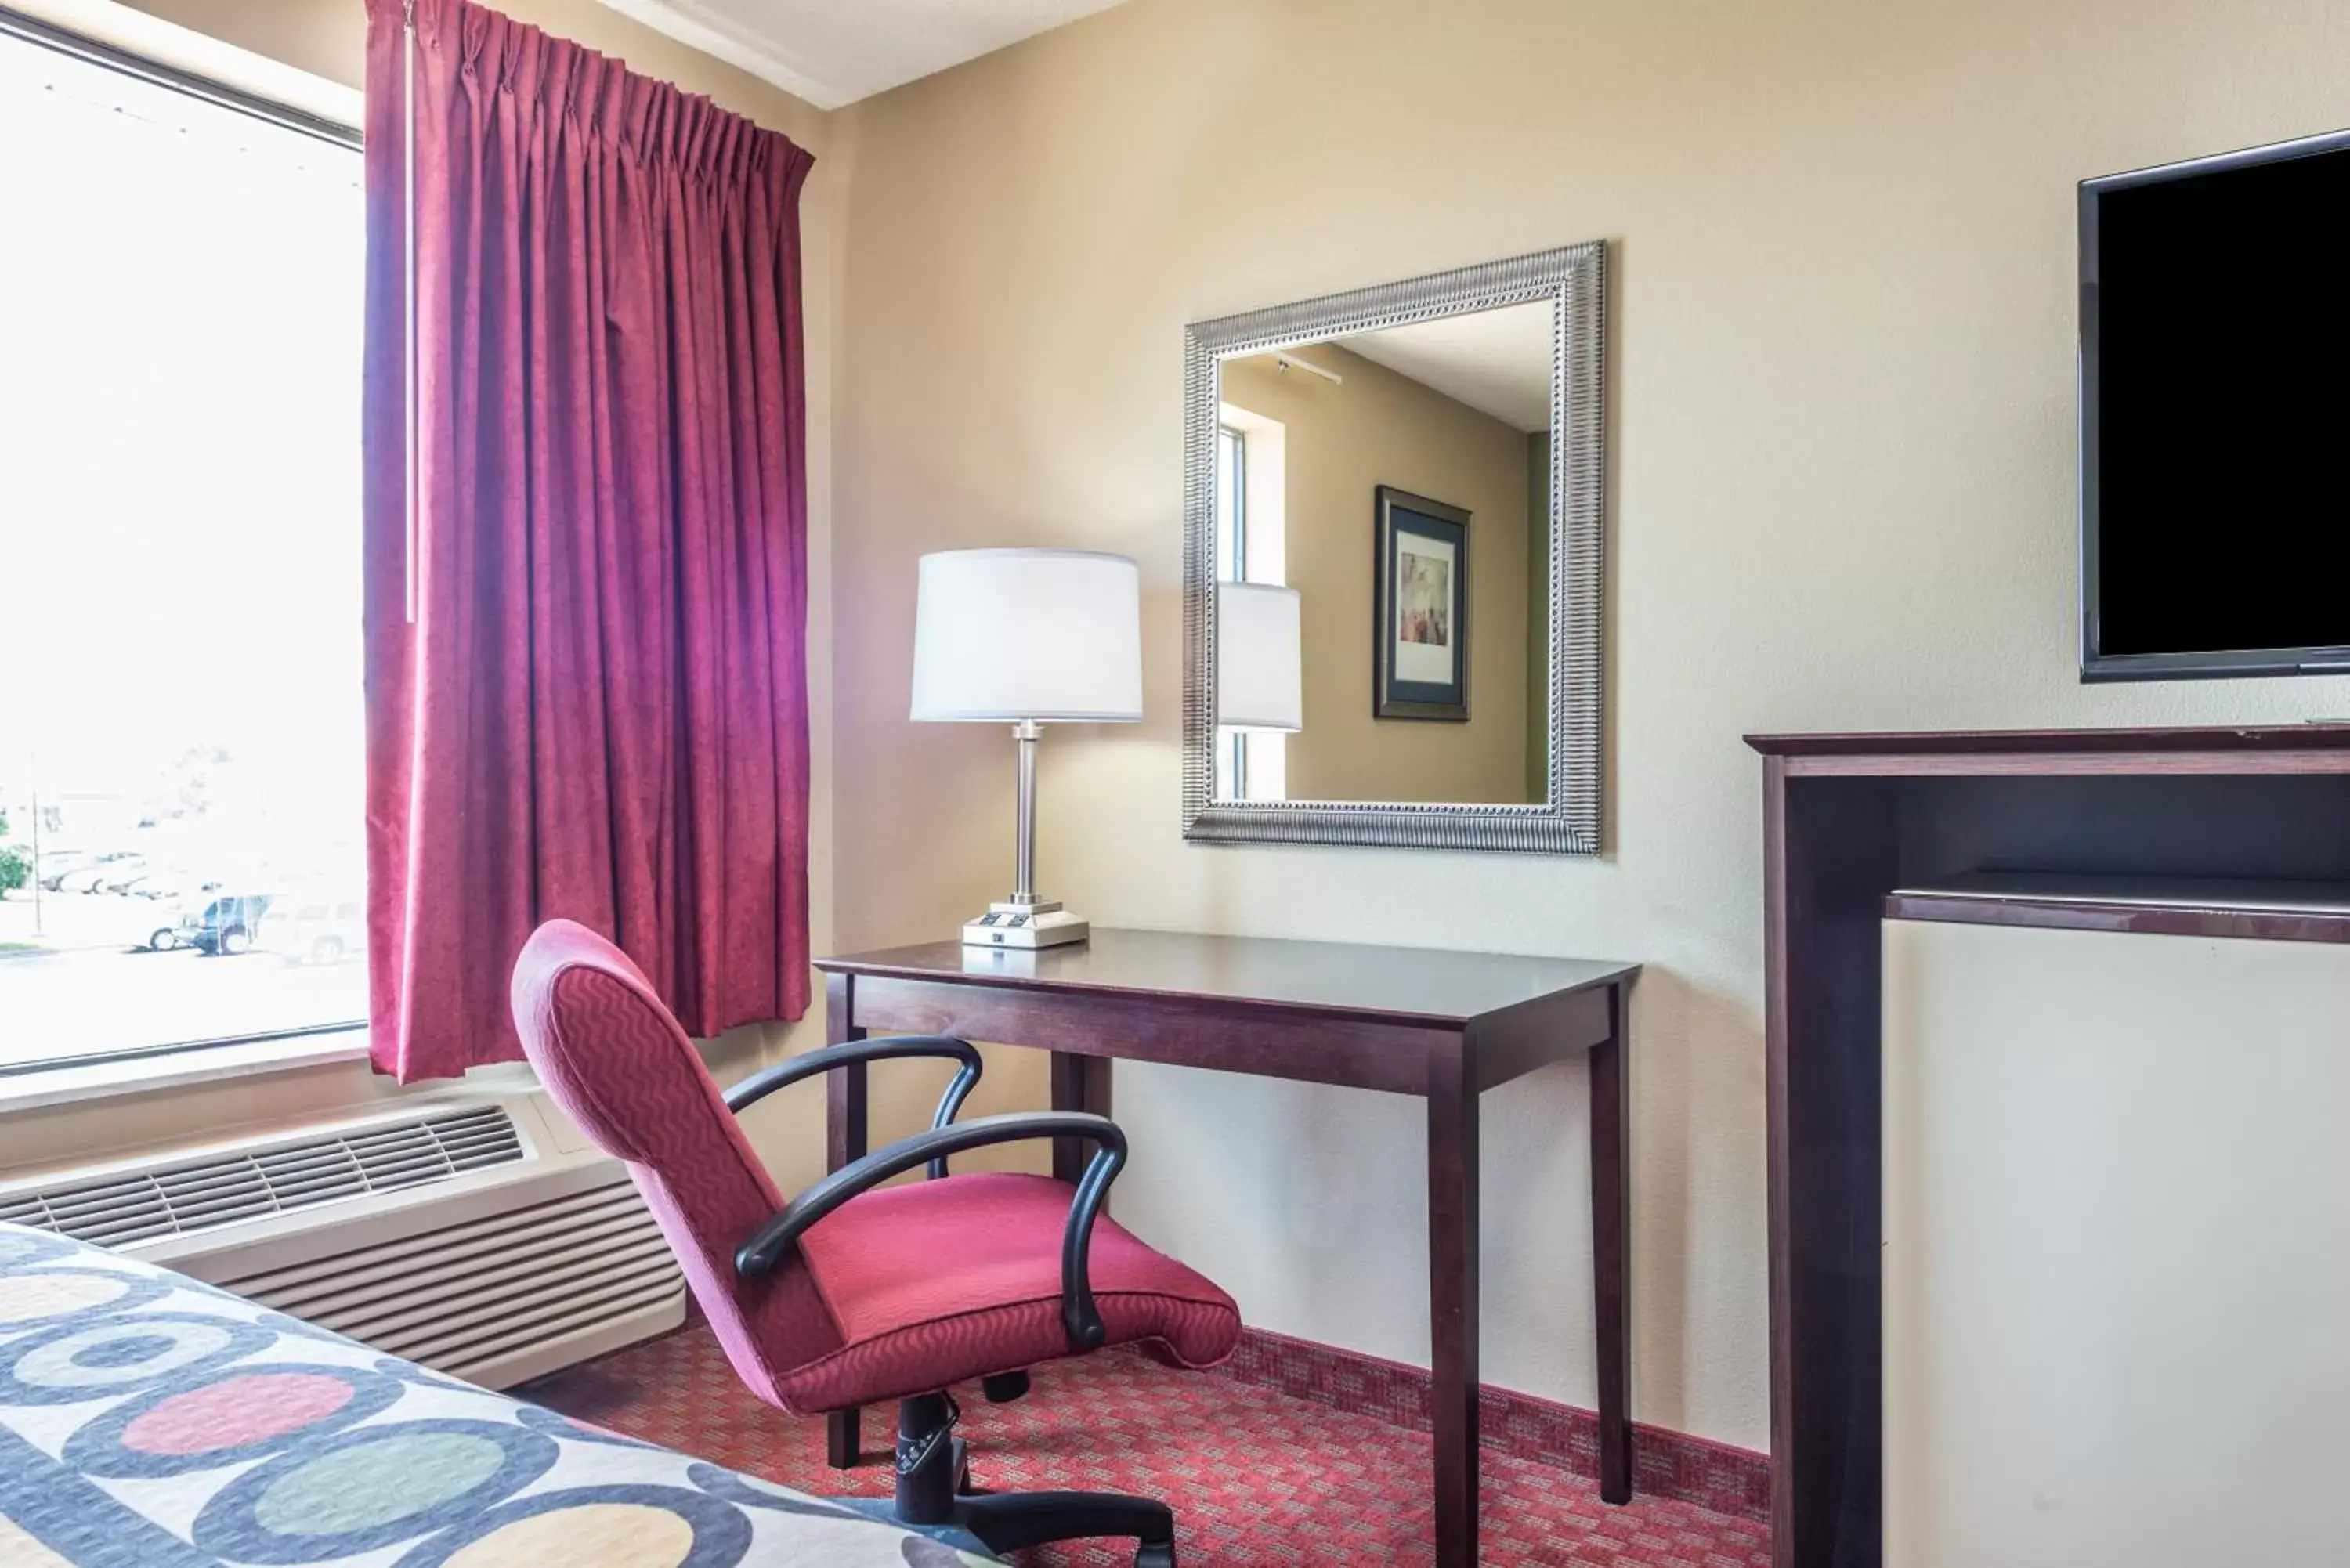 King Room - Non-Smoking in Super 8 by Wyndham Troy IL/St. Louis Area